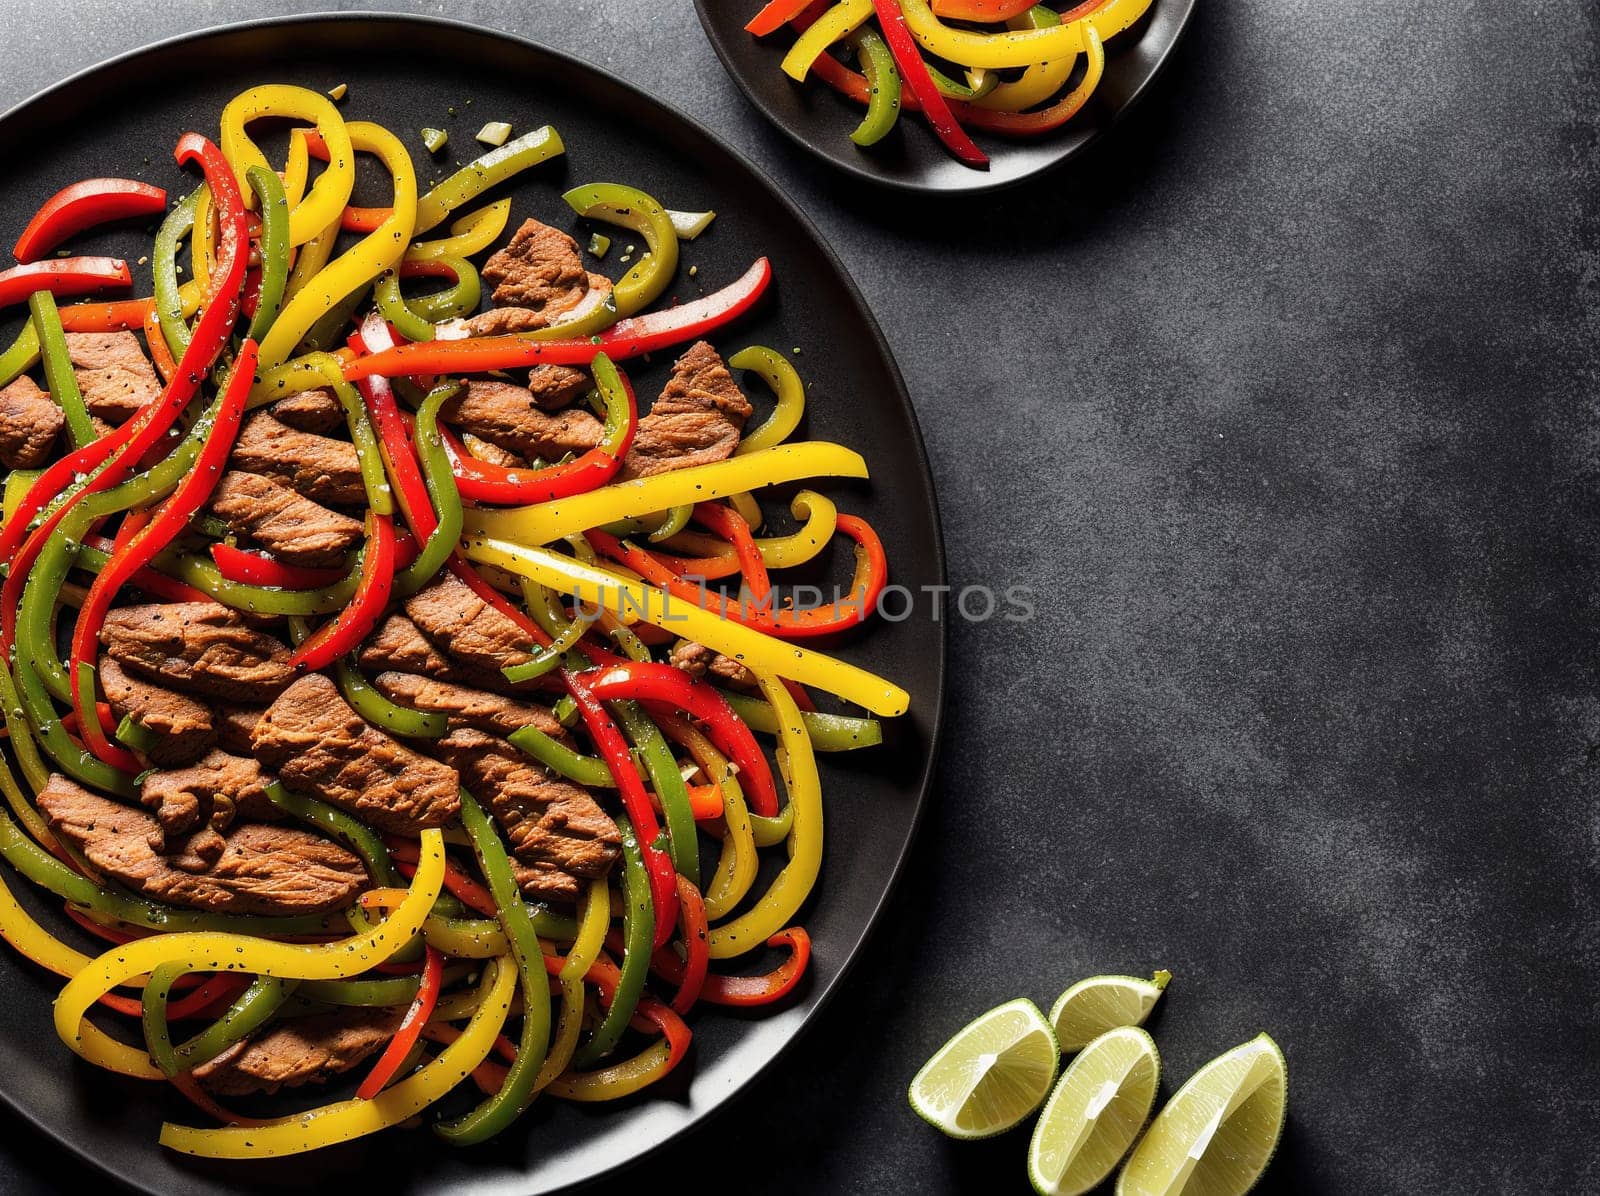 The image shows a plate of beef fajitas with peppers, onions, and lime wedges on the side.